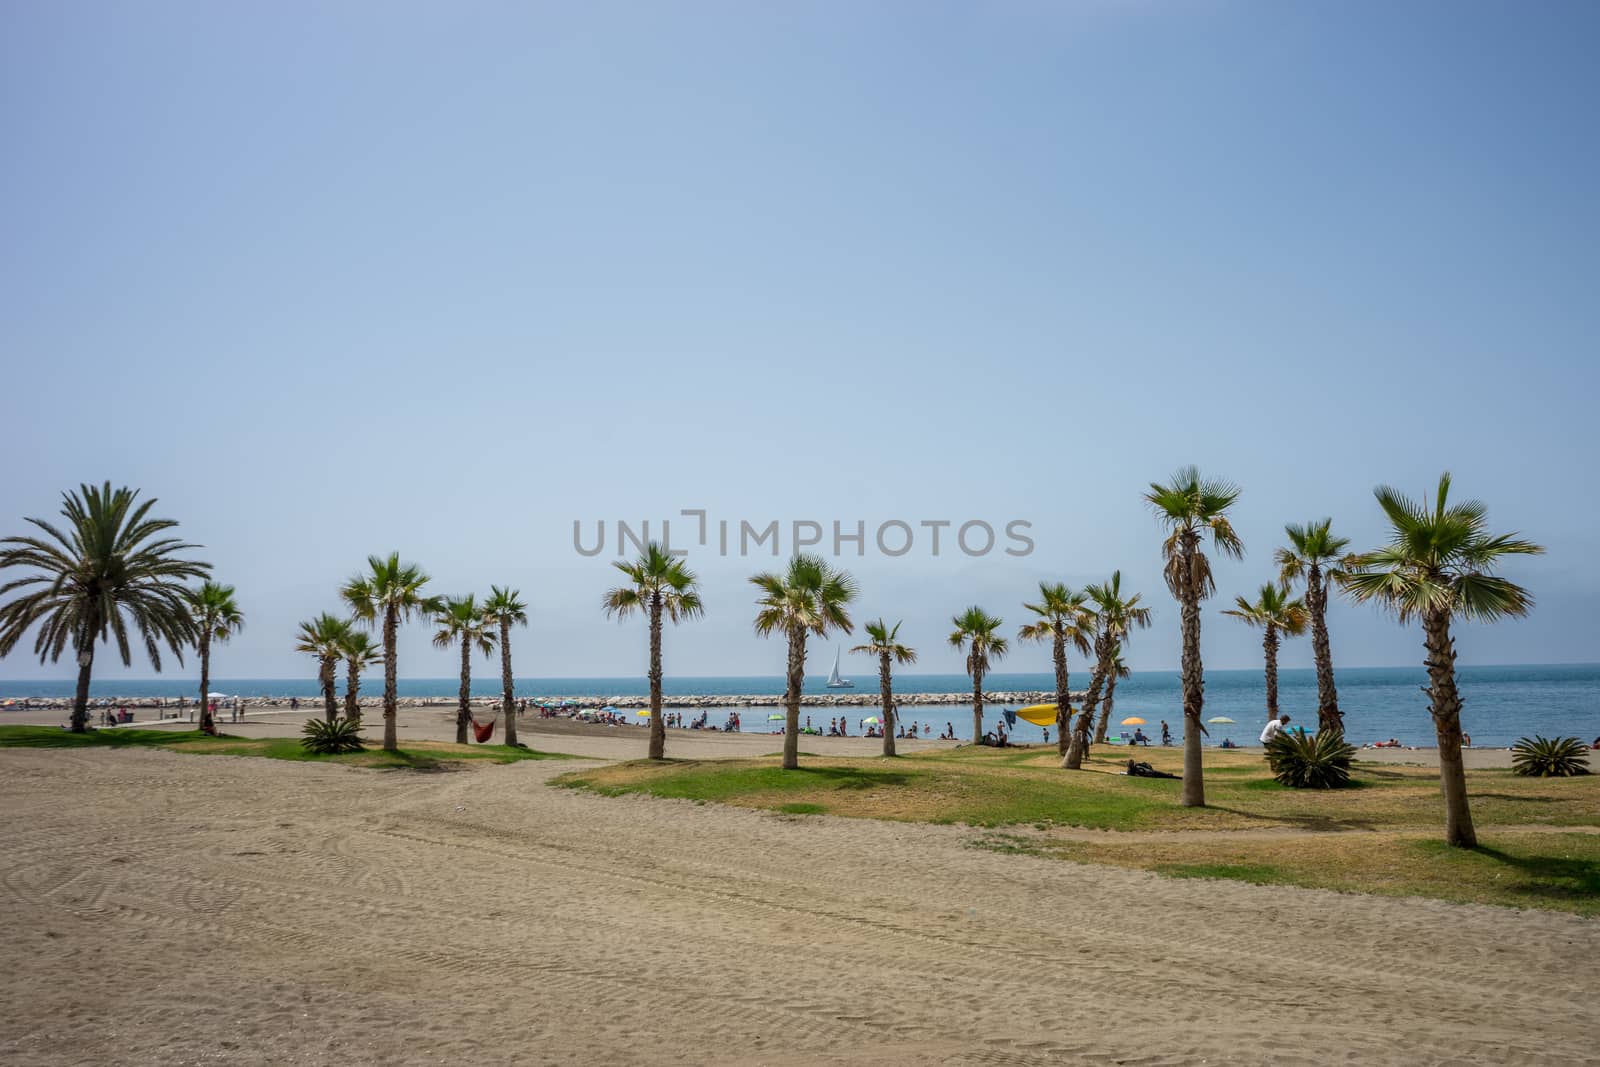 A collective bunch of palm trees at Malagueta beach with the ocean in the background in Malaga, Spain, Europe on a cloudy morning